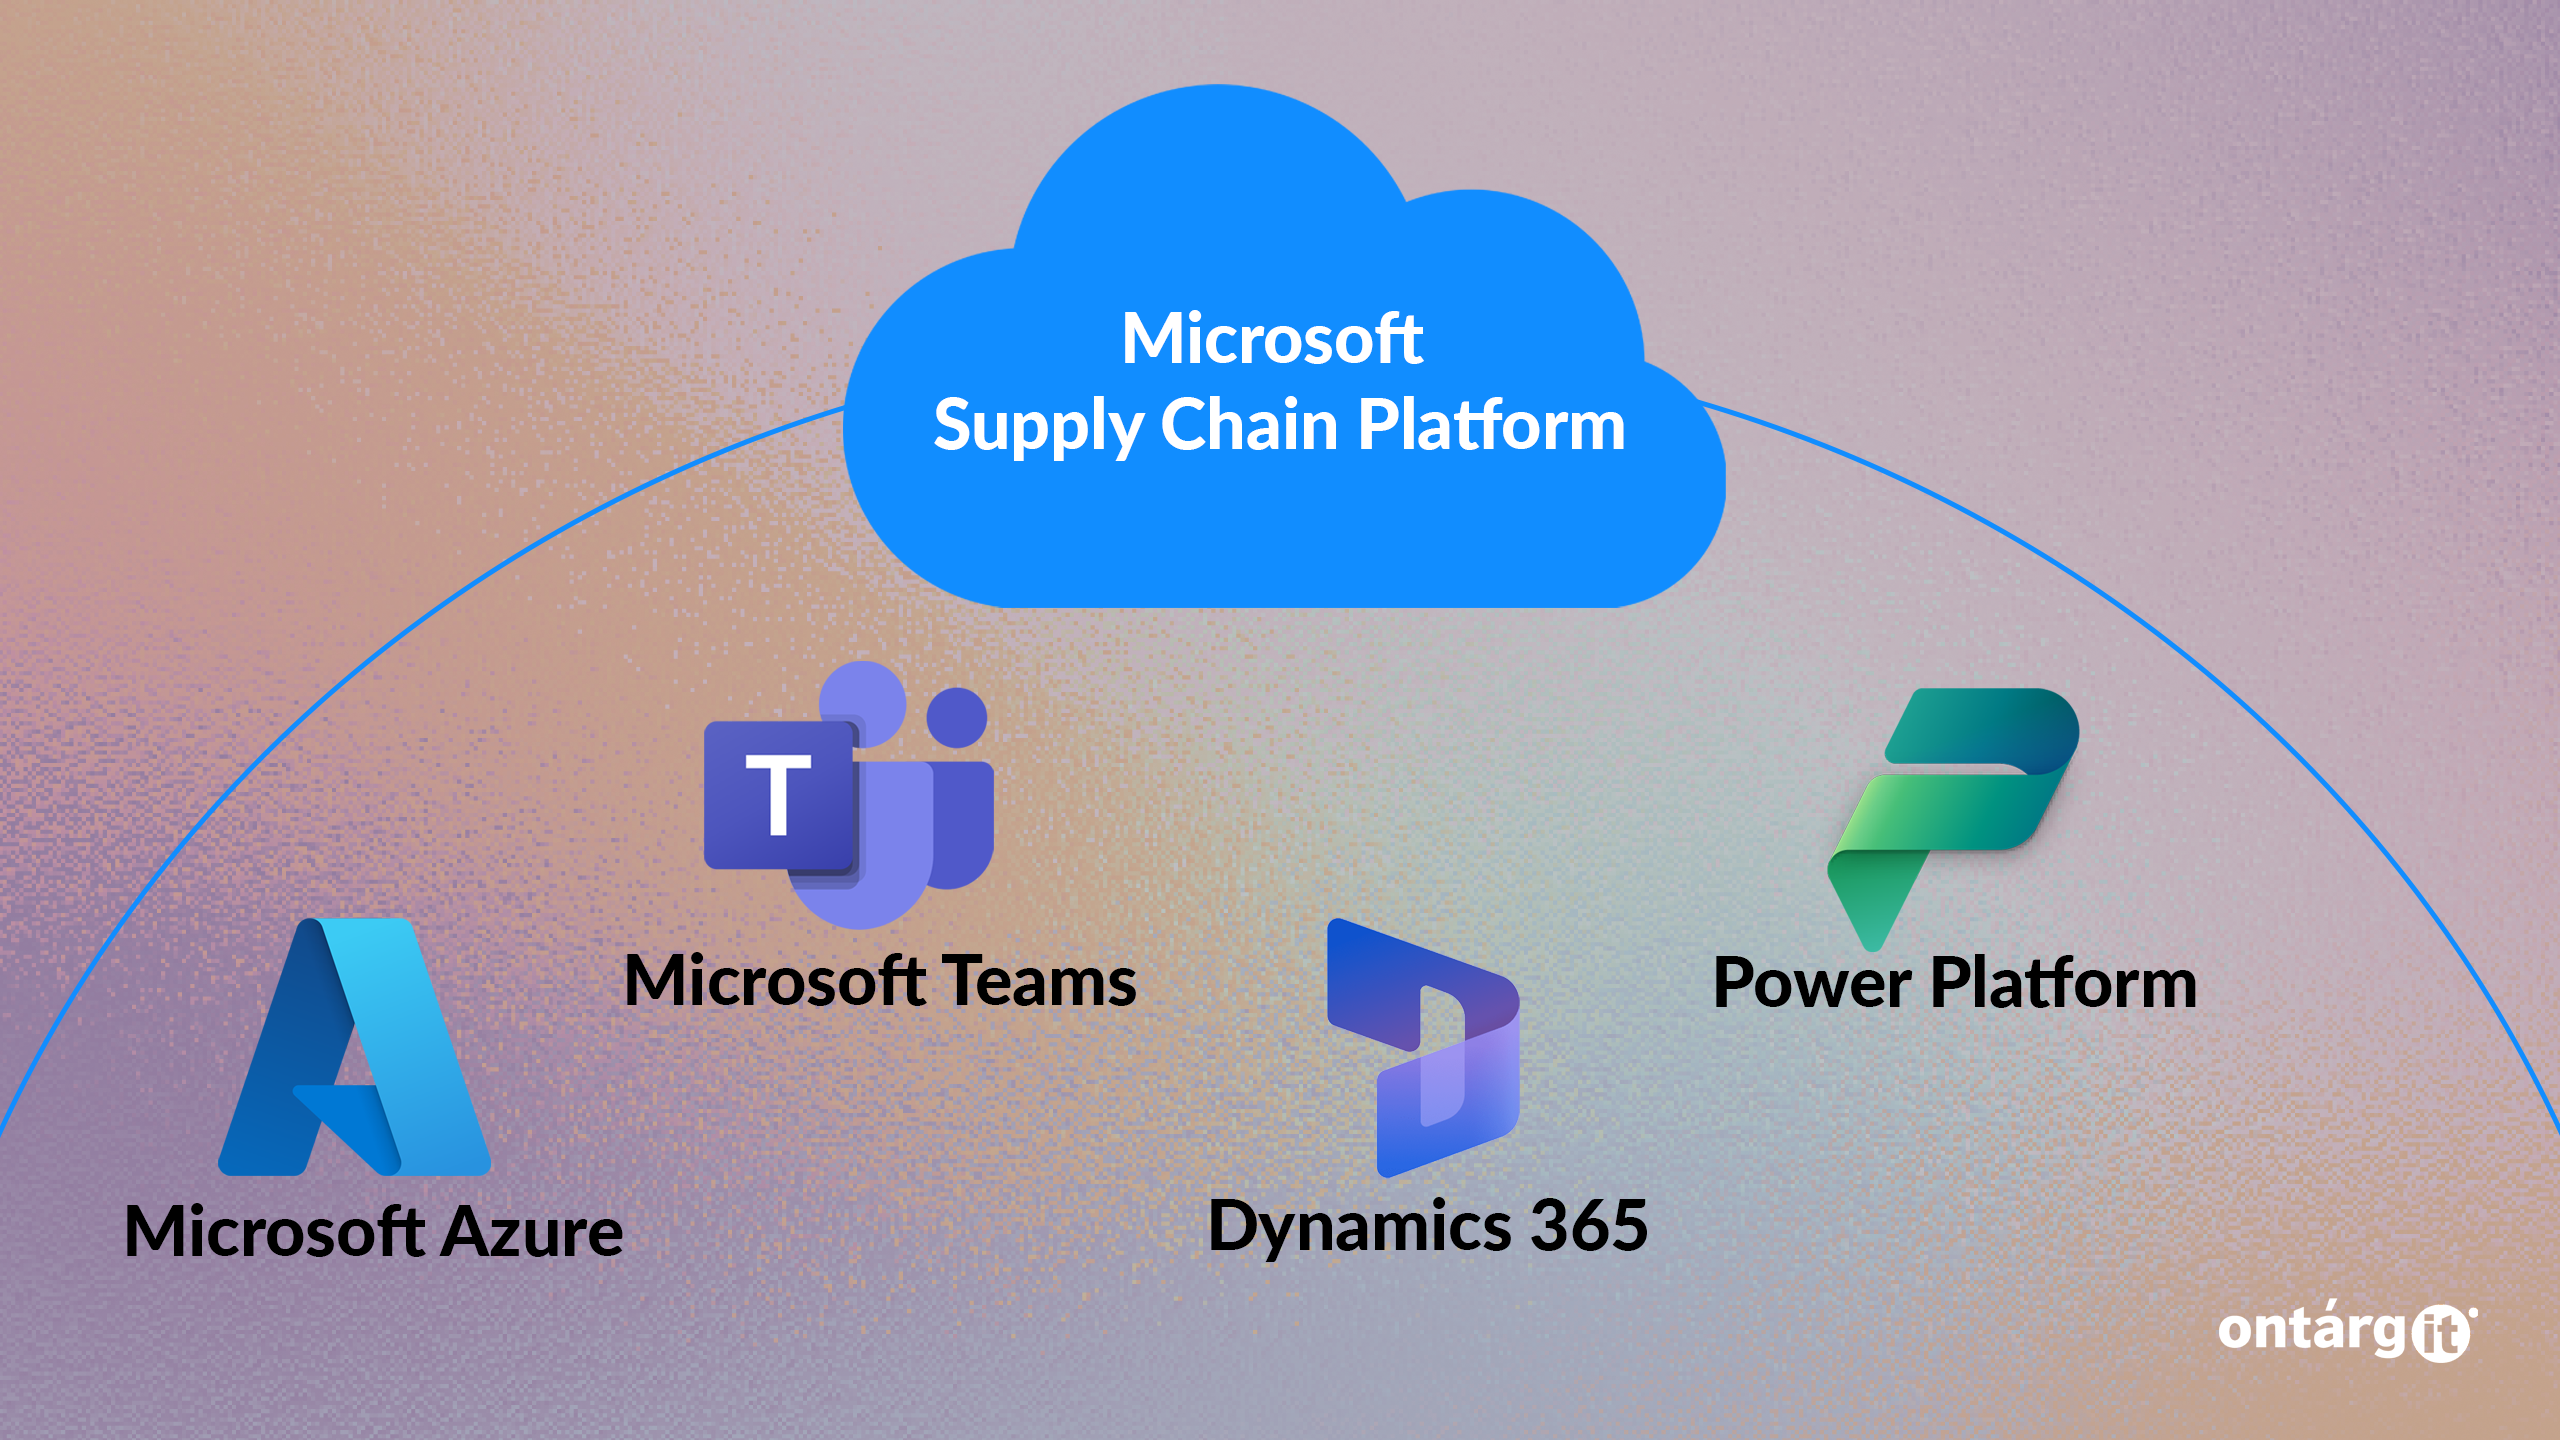 Microsoft Supply Chain Platform is integrated